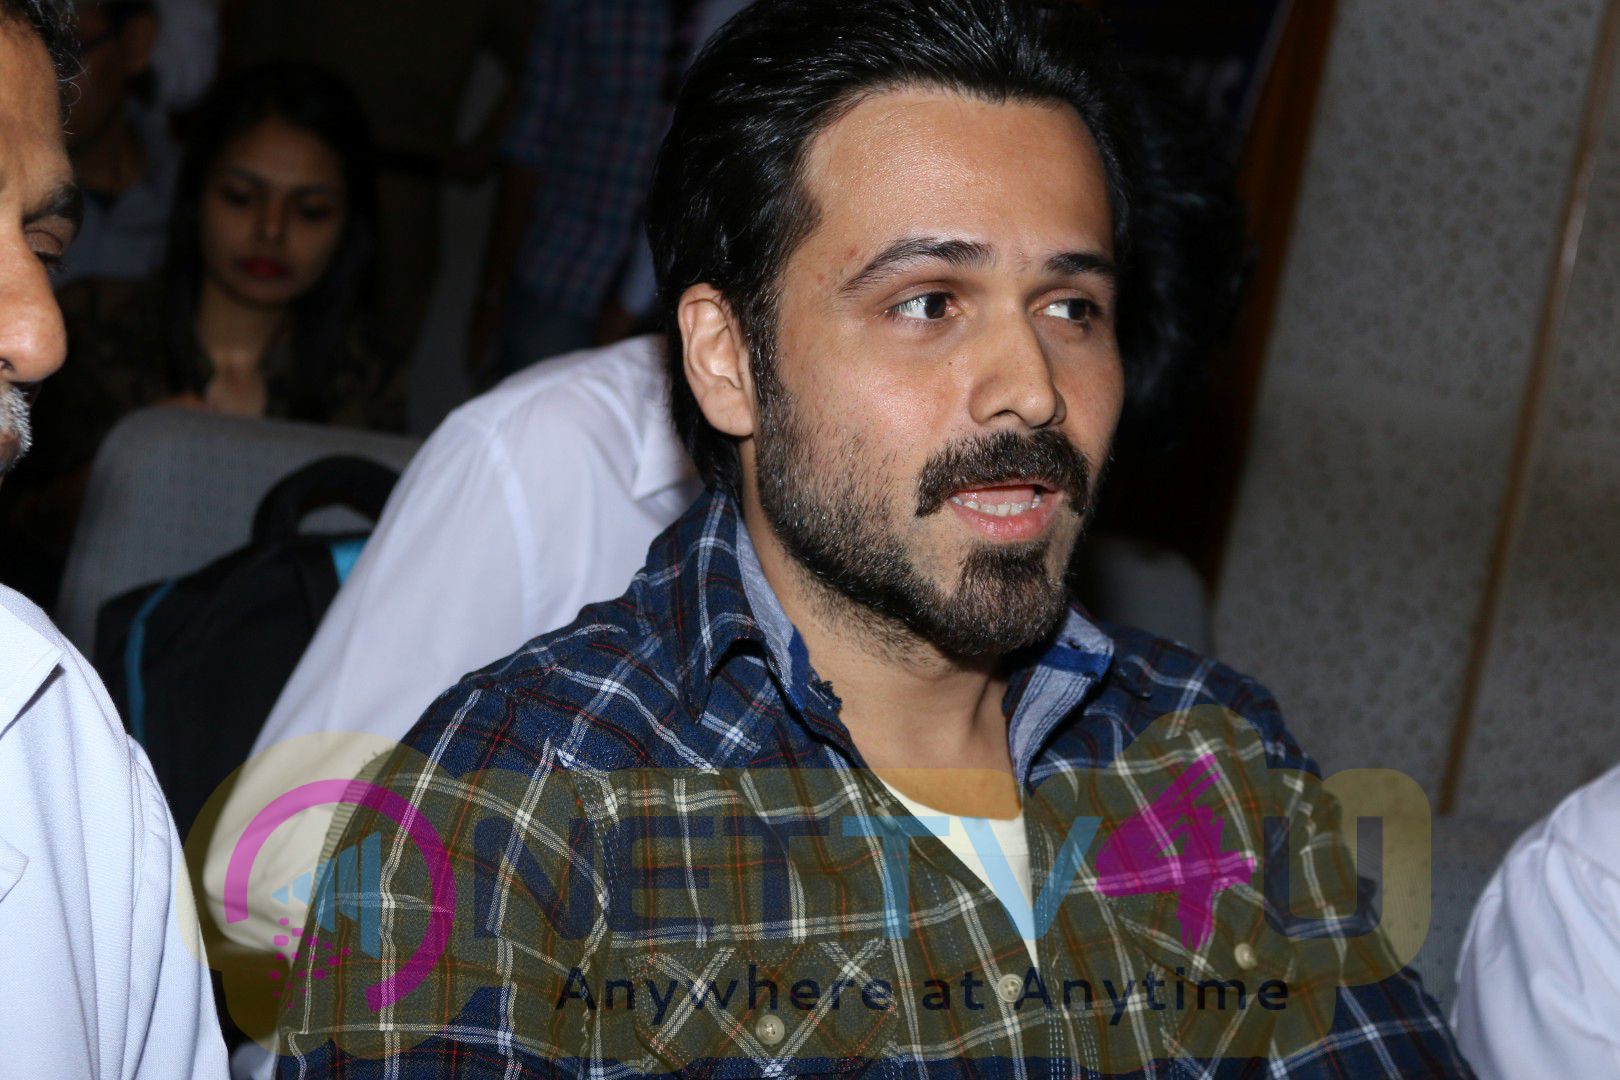  Launch Of Cancer Awareness Campaign In Presence Of Actor Emraan Hashmi Pics Hindi Gallery